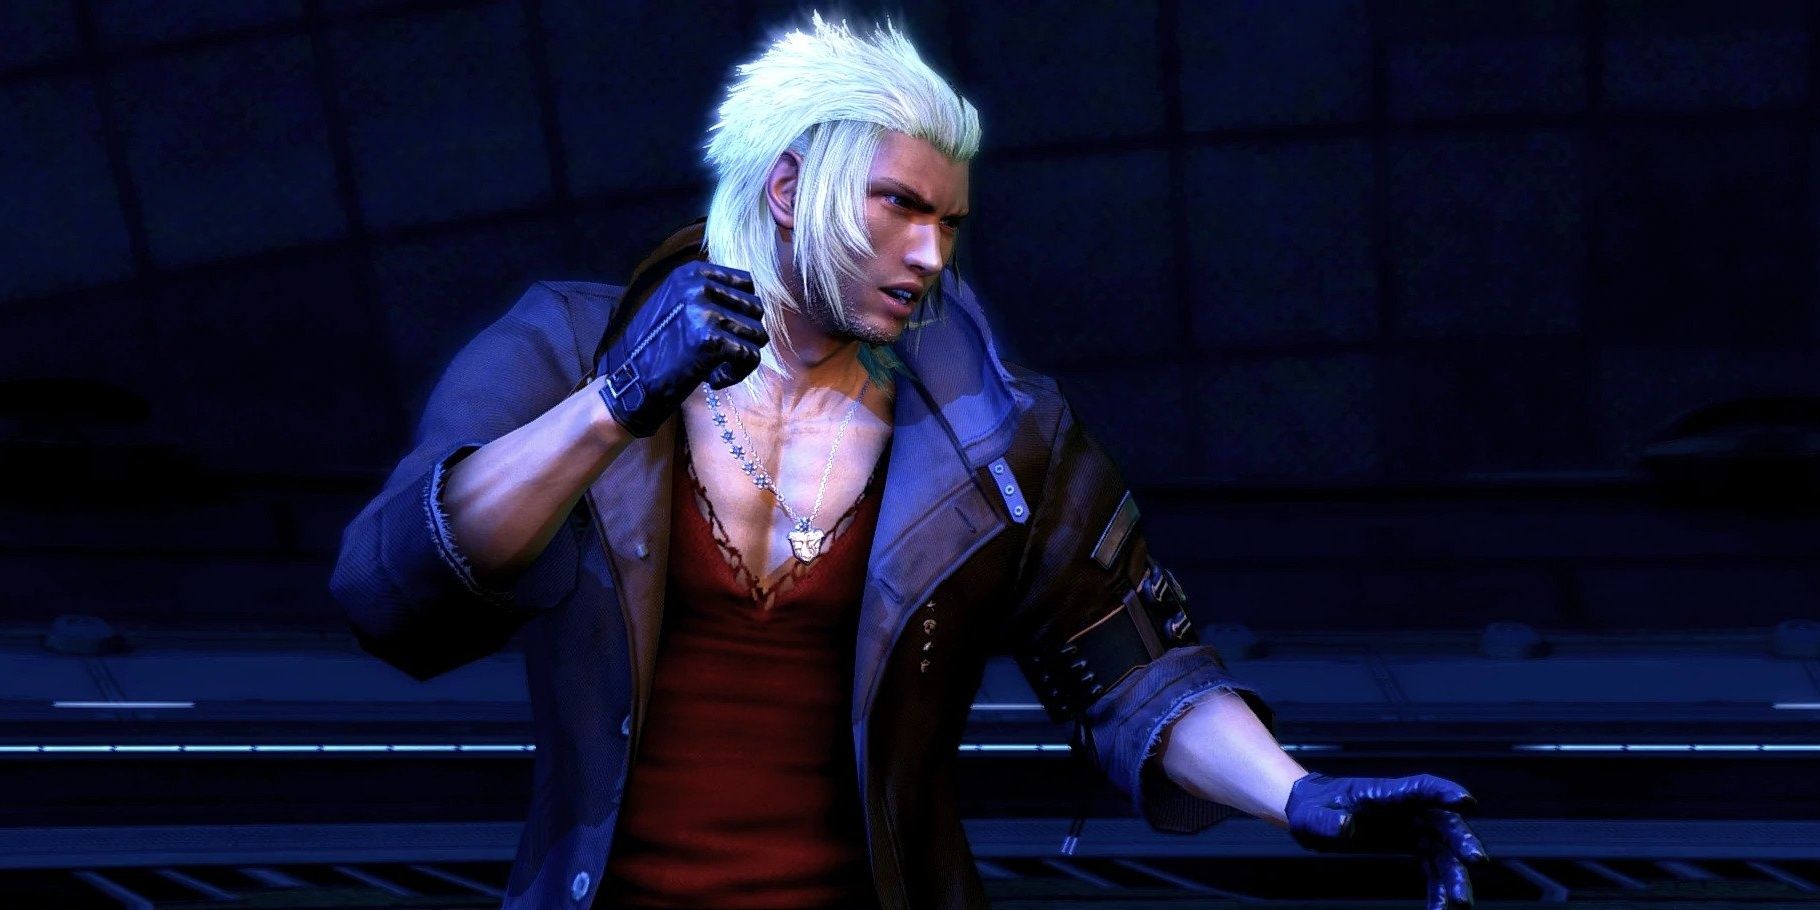 Snow getting ready to throw down in FFXIII